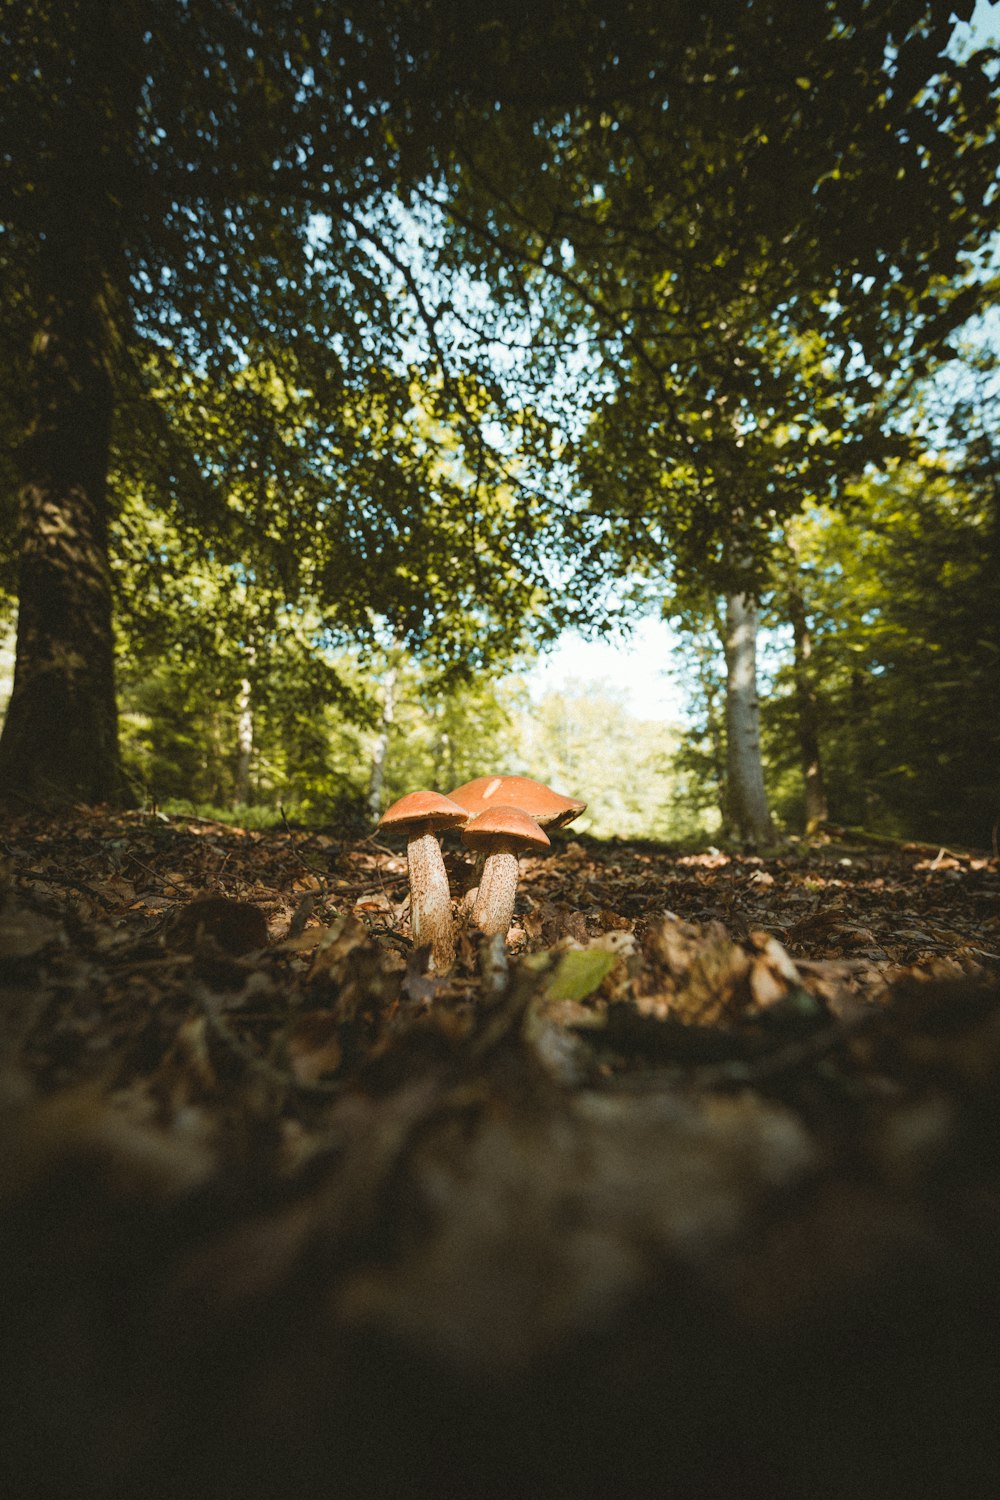 brown mushroom on ground surrounded by green trees during daytime